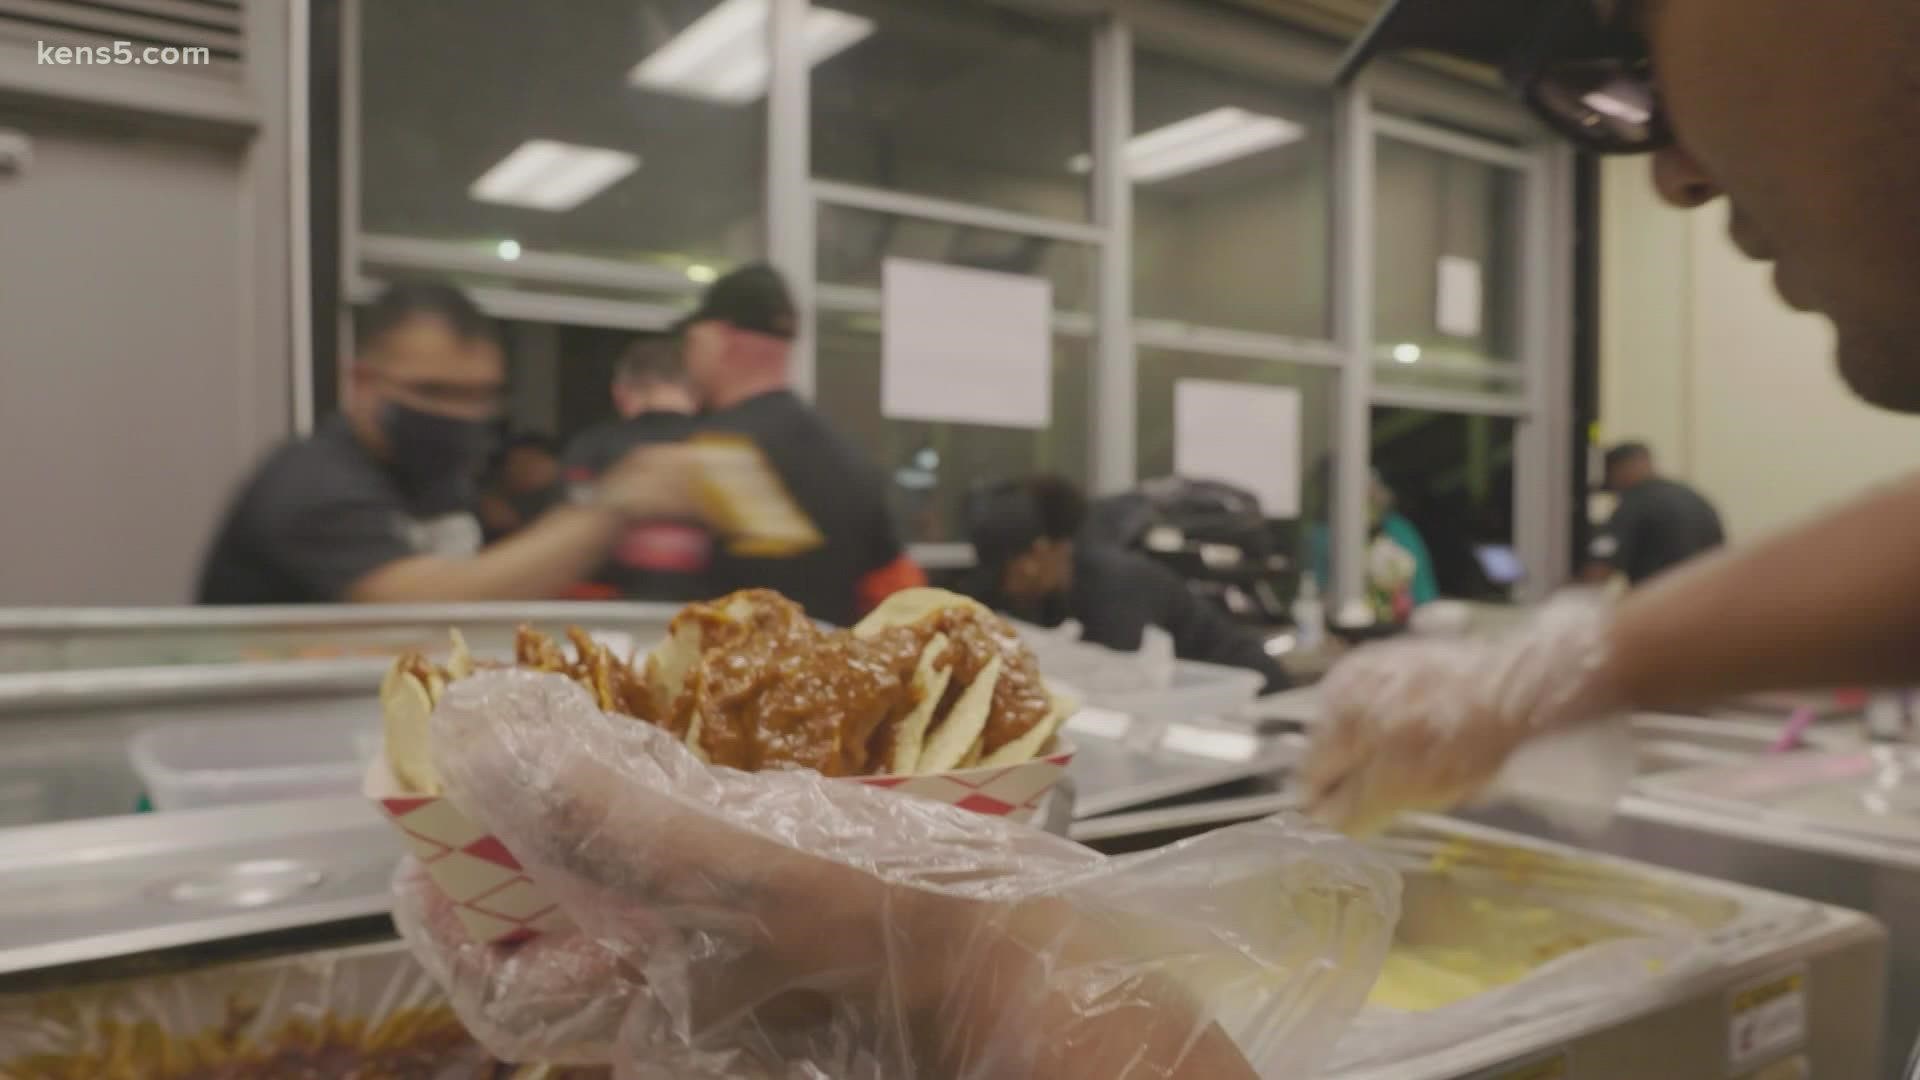 KENS 5 teamed up with Cake-N-Que to give football fans something extra to cheer for.